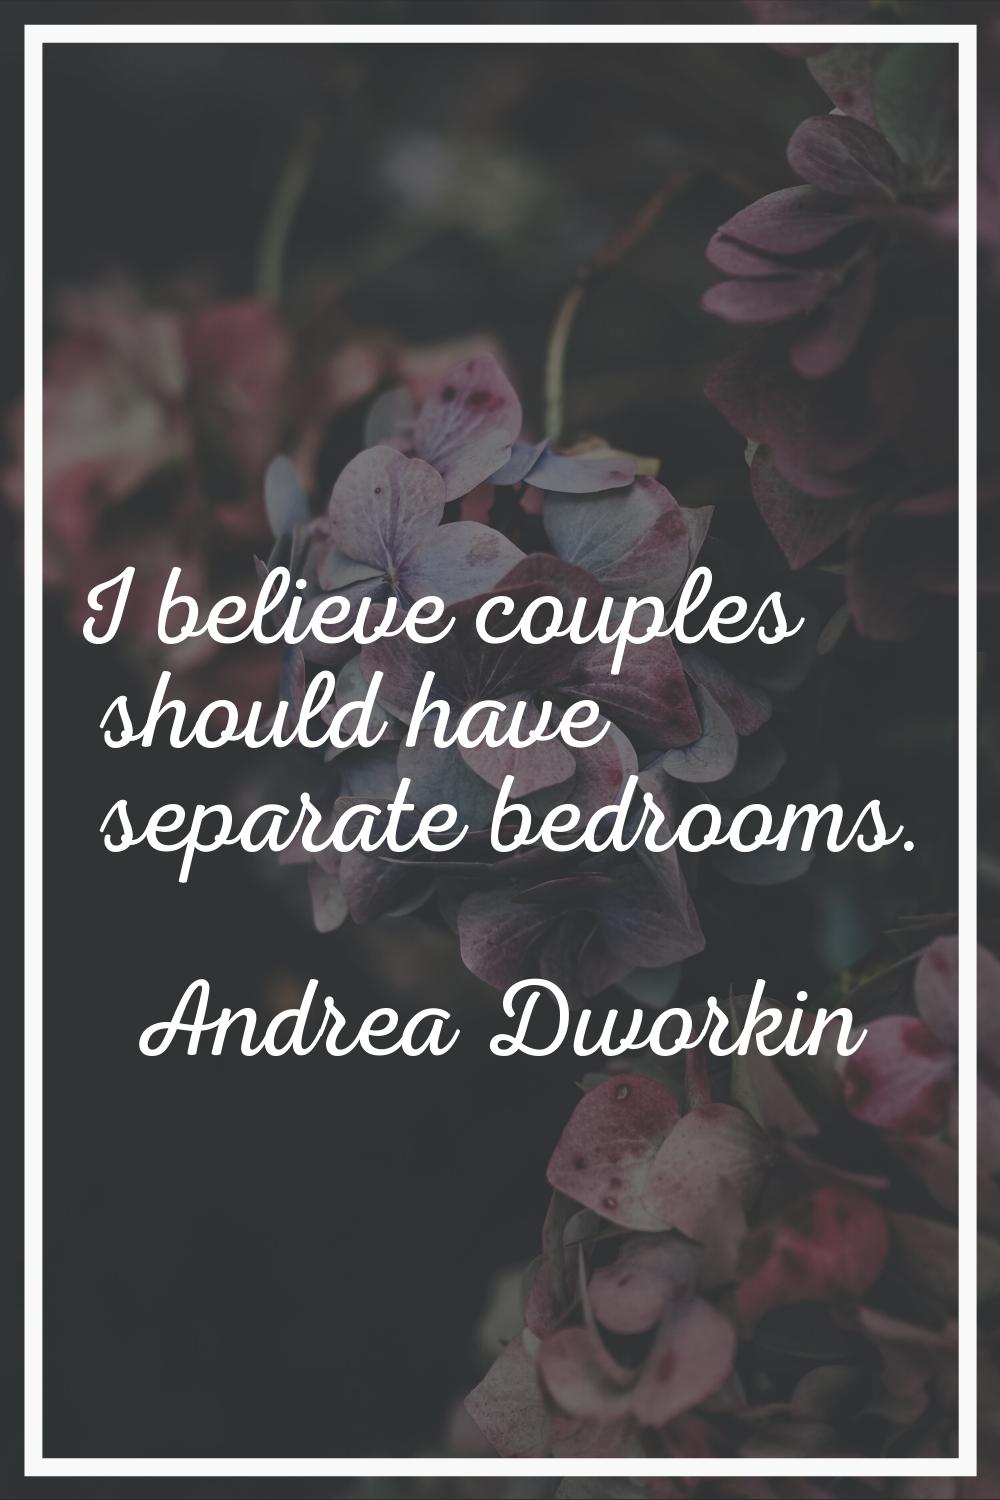 I believe couples should have separate bedrooms.